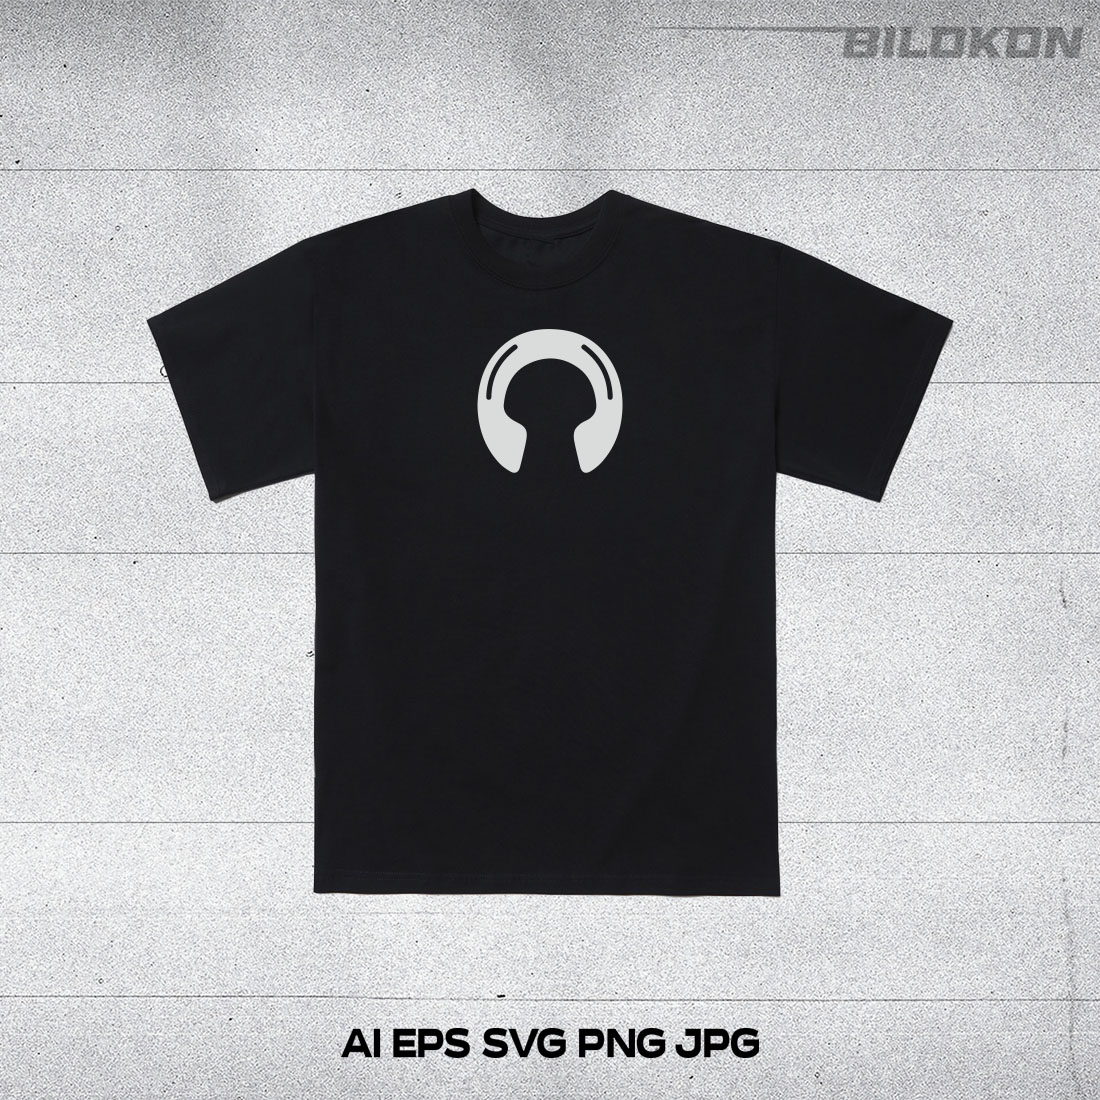 Black t - shirt with a white headphone on it.